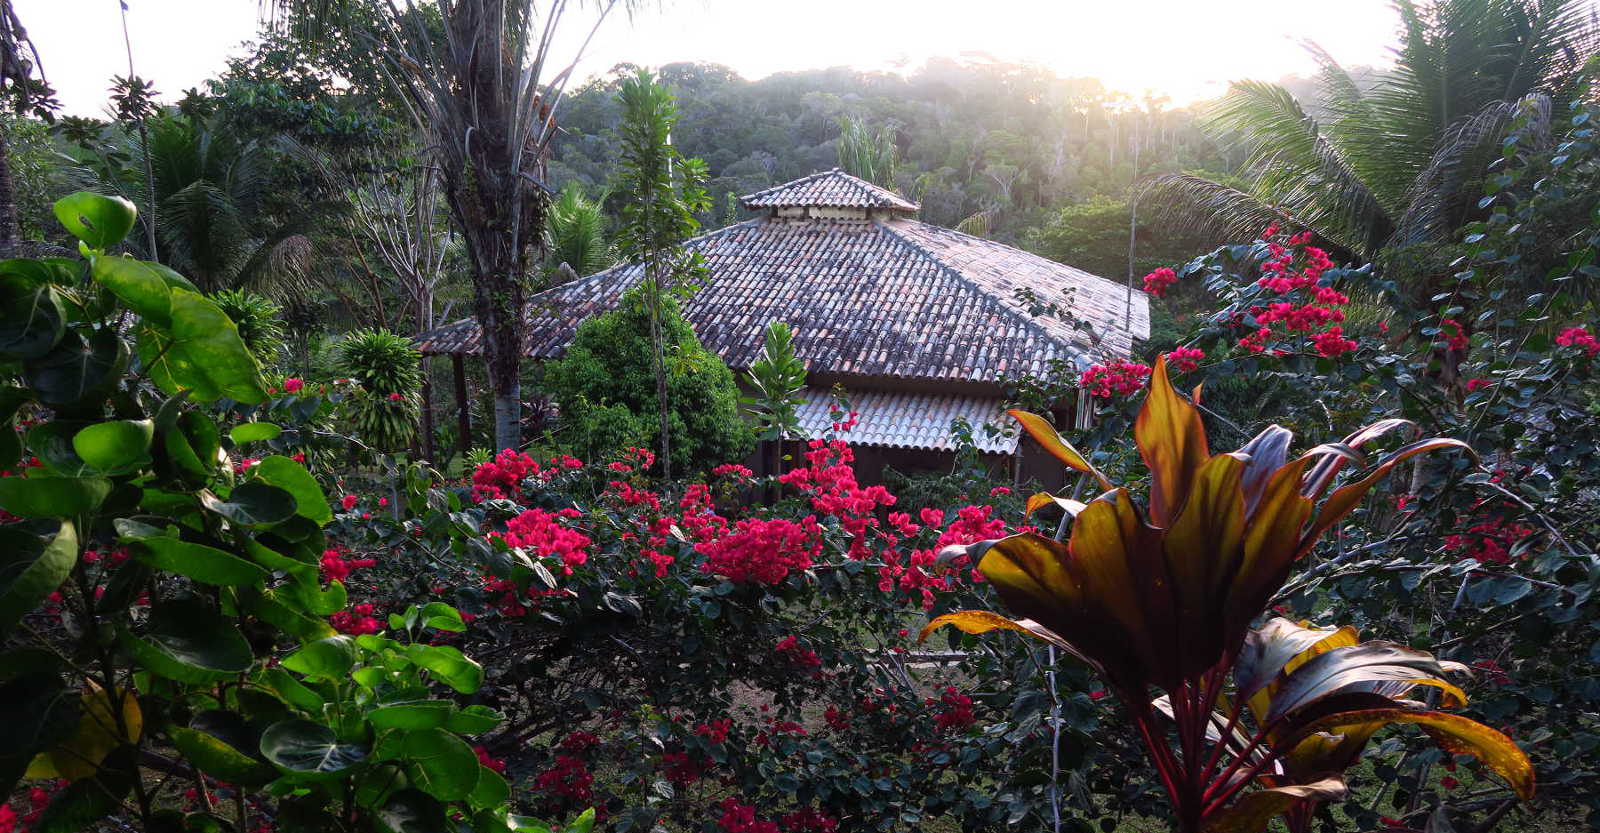 A view of lush jungle wildlife, including many pinkish red flowers (ayahuasca retreats)